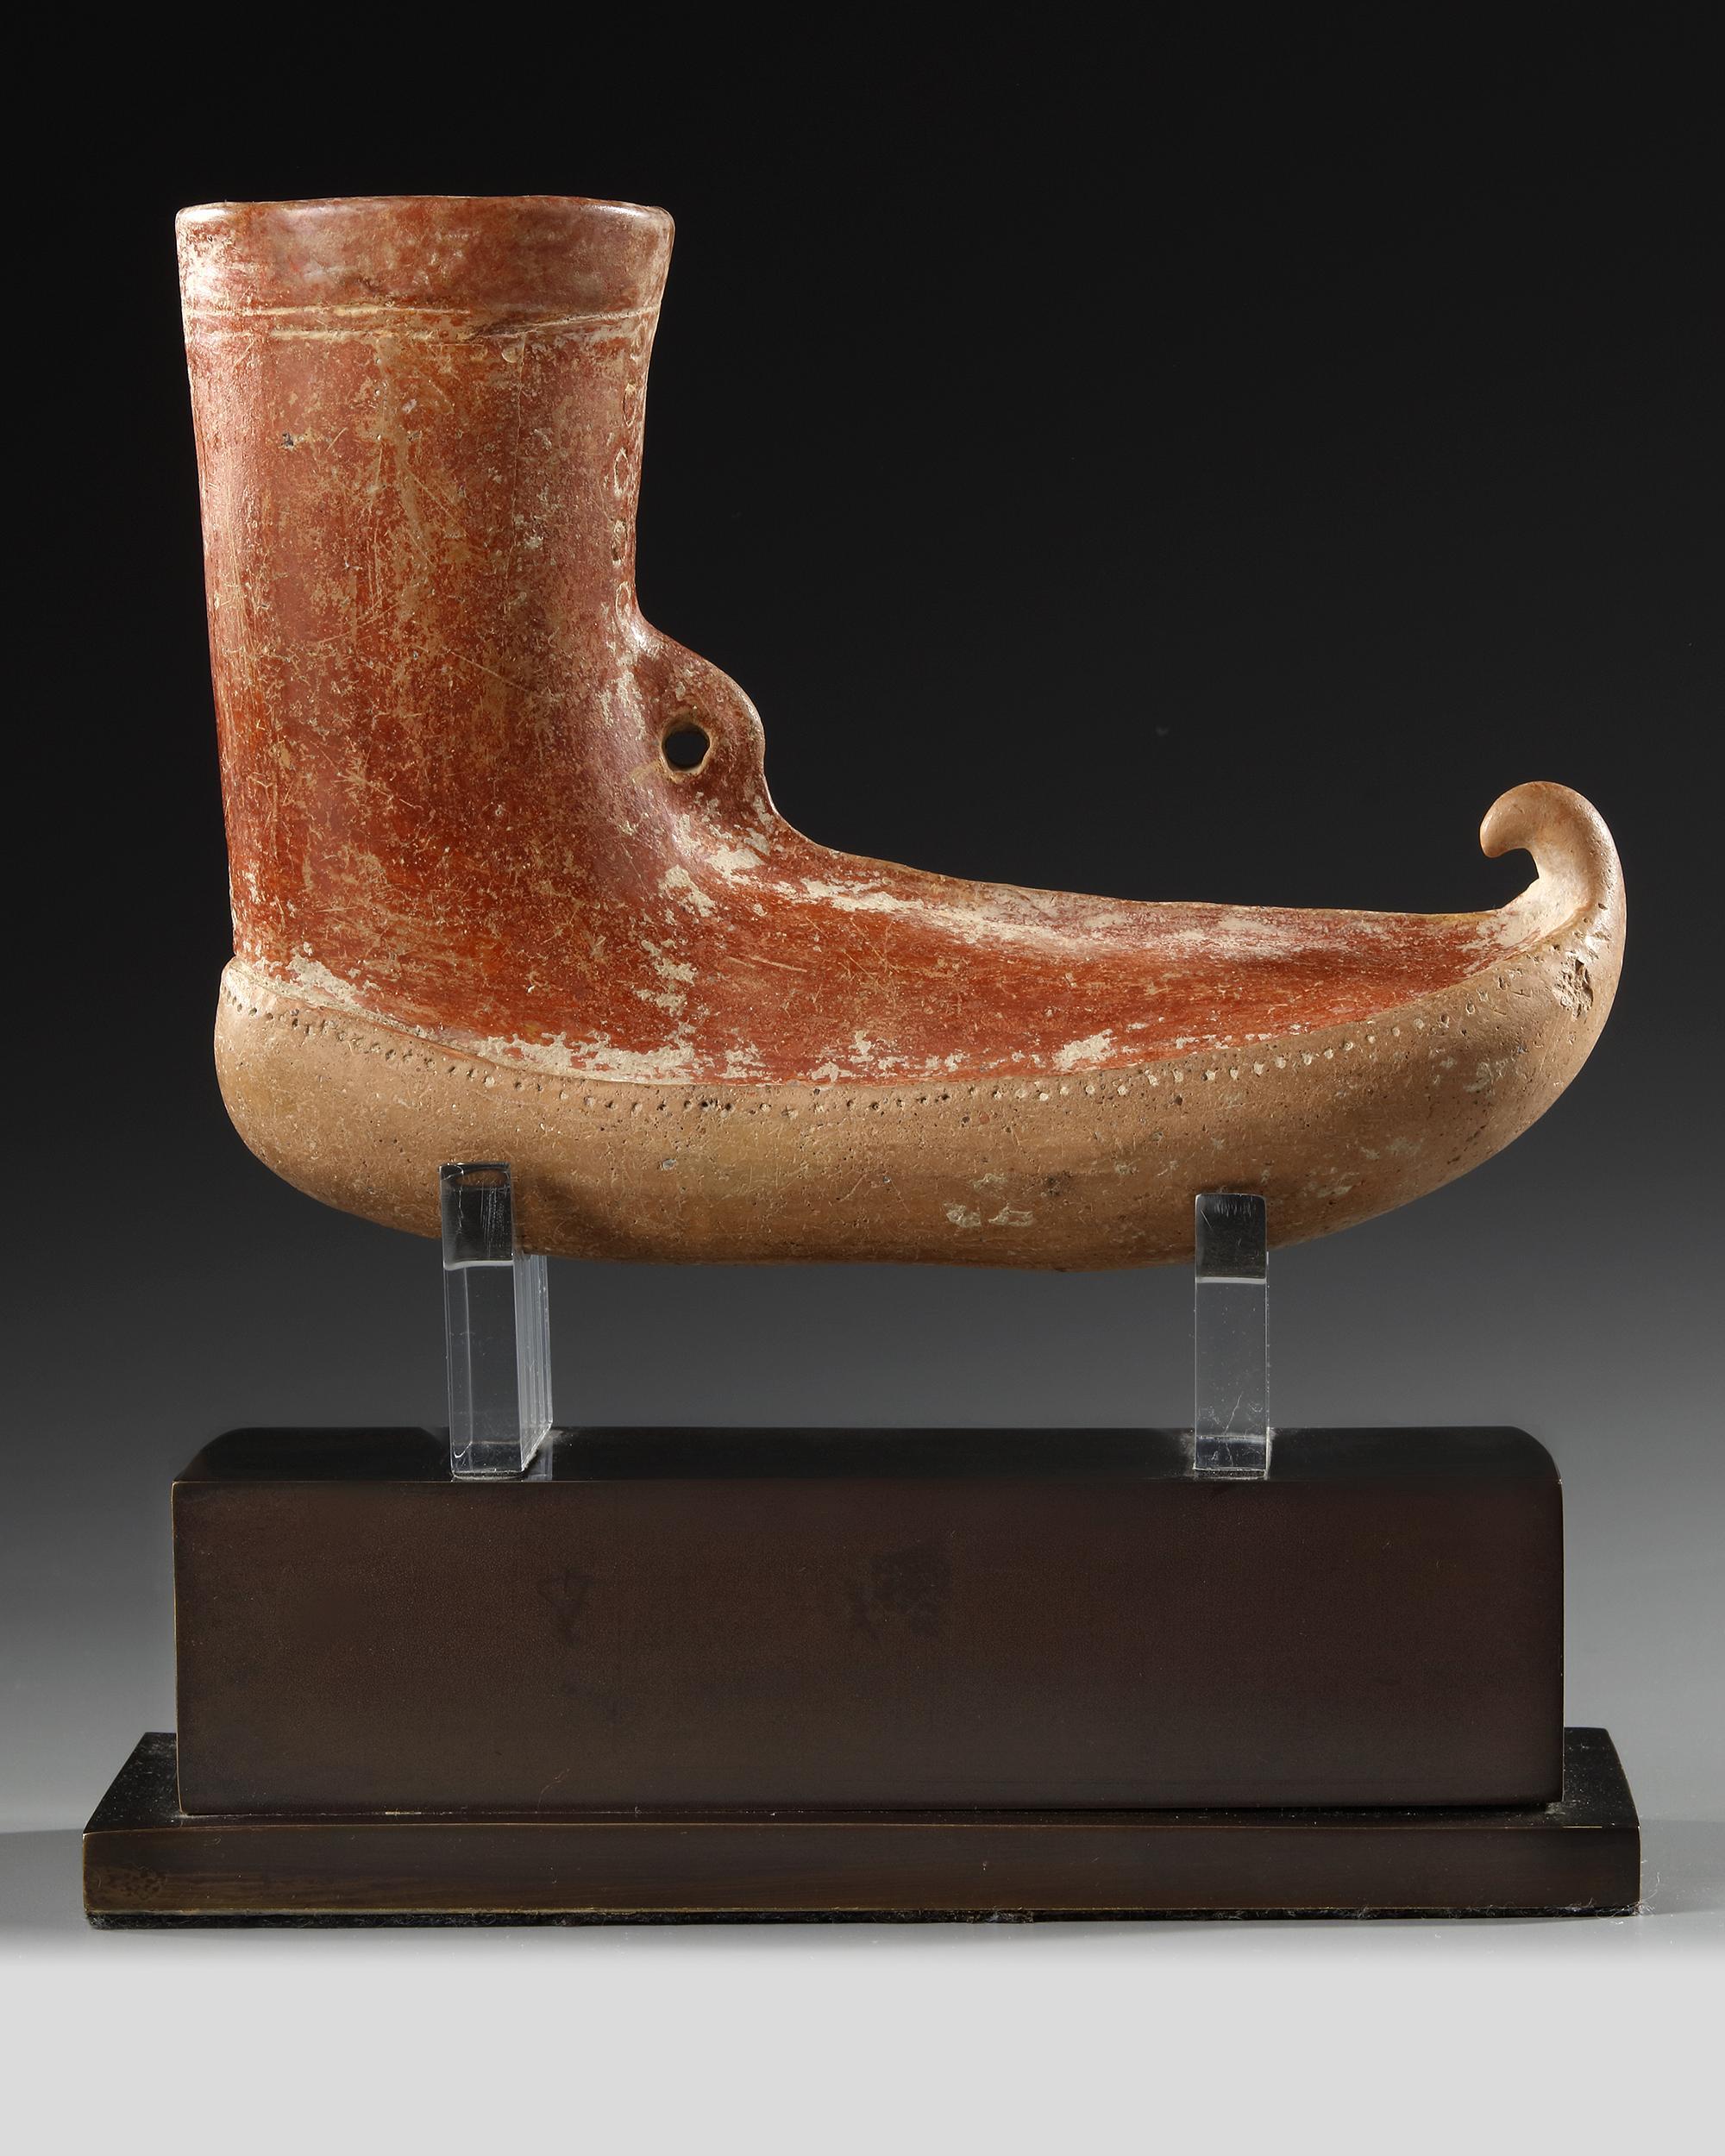 AN AMLASH RHYTON POTTERY IN FORM OF SHOES, CIRCA 1ST MILLENNIUM B.C. - Image 2 of 5